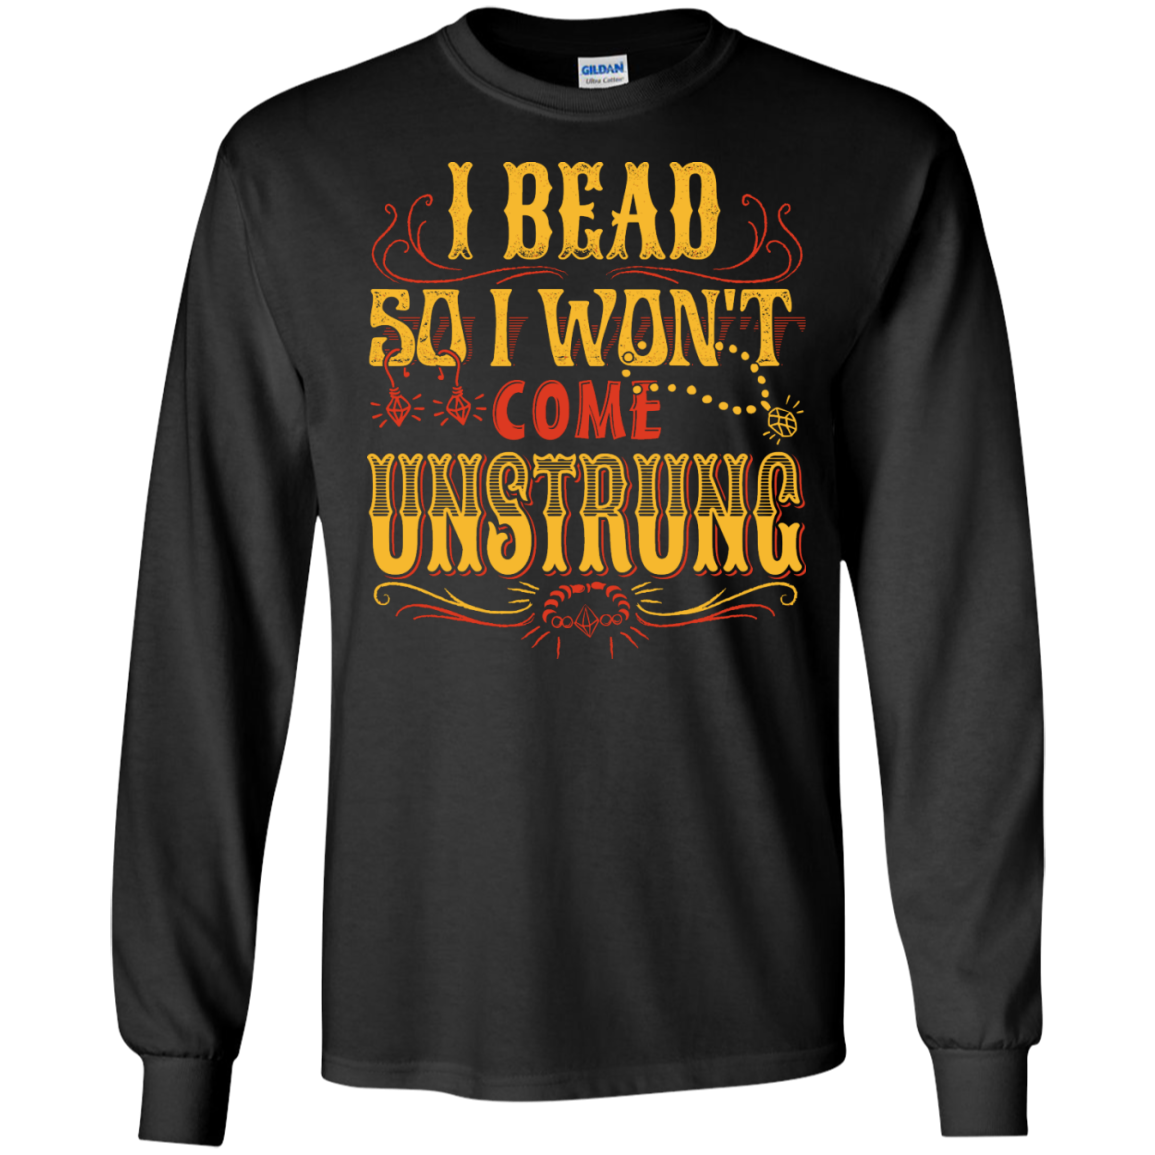 I Bead So I Won't Come Unstrung (gold) Long Sleeve Ultra Cotton T-Shirt - Crafter4Life - 2